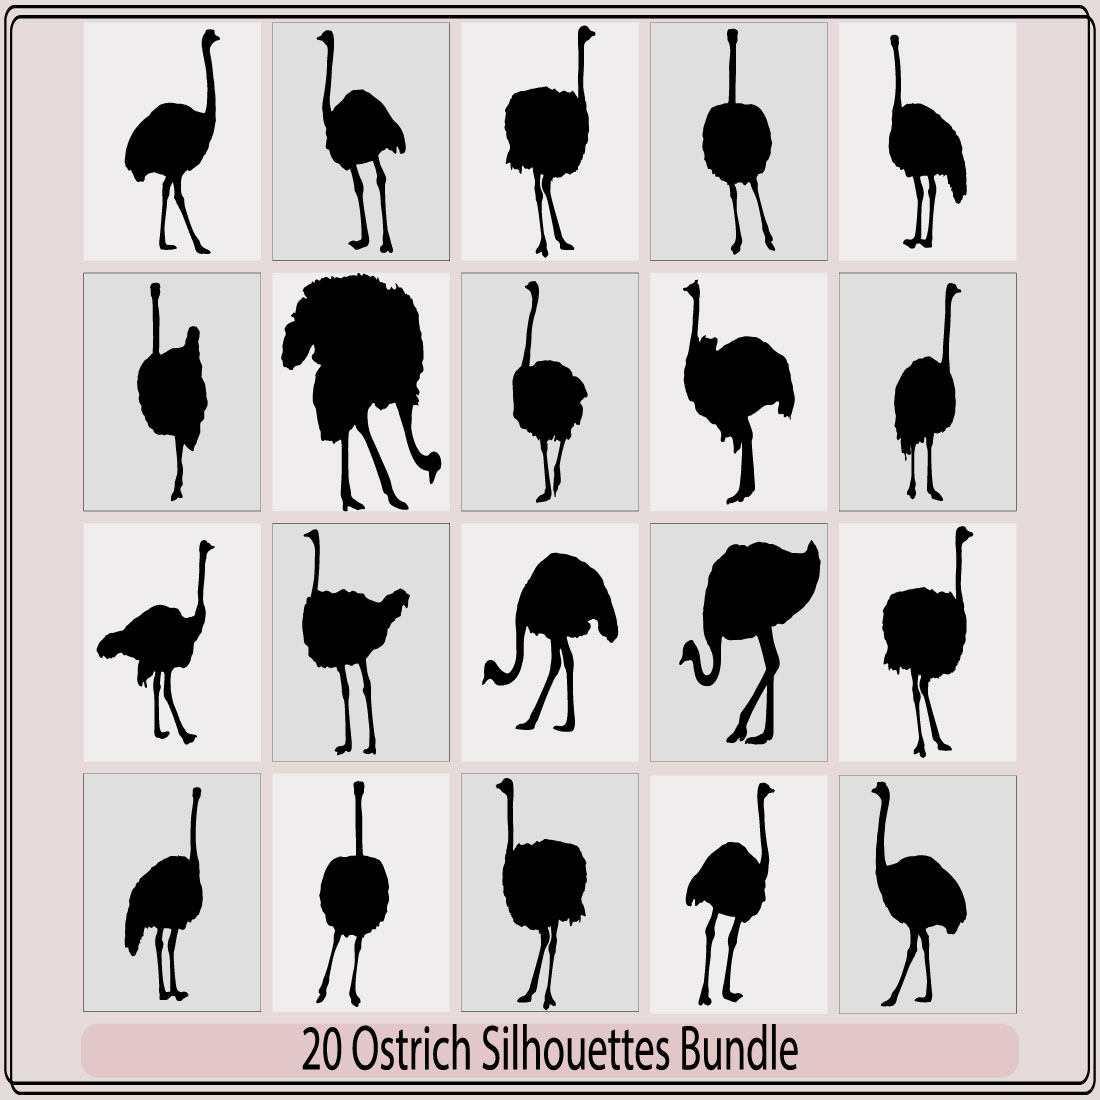 ostrich silhouette collection,silhouette of ostrich,Set of ostrich silhouettes,set of ostrich logo,Vector illustration of a black silhouette ostrich preview image.